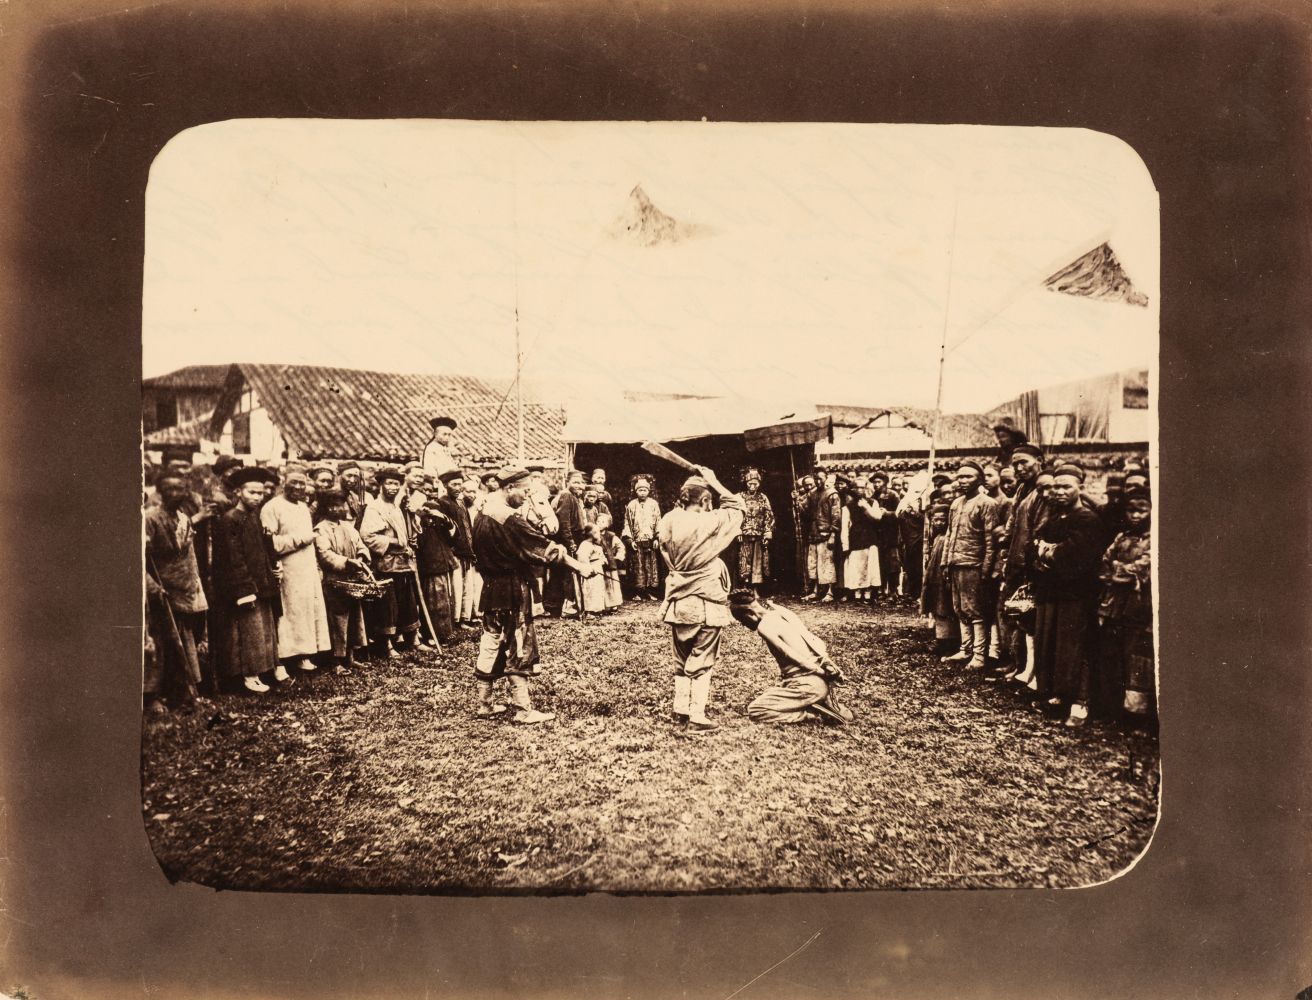 China. Chinese execution [and] Chinese convicts in the Kangue, both by William Saunders, c. 1870